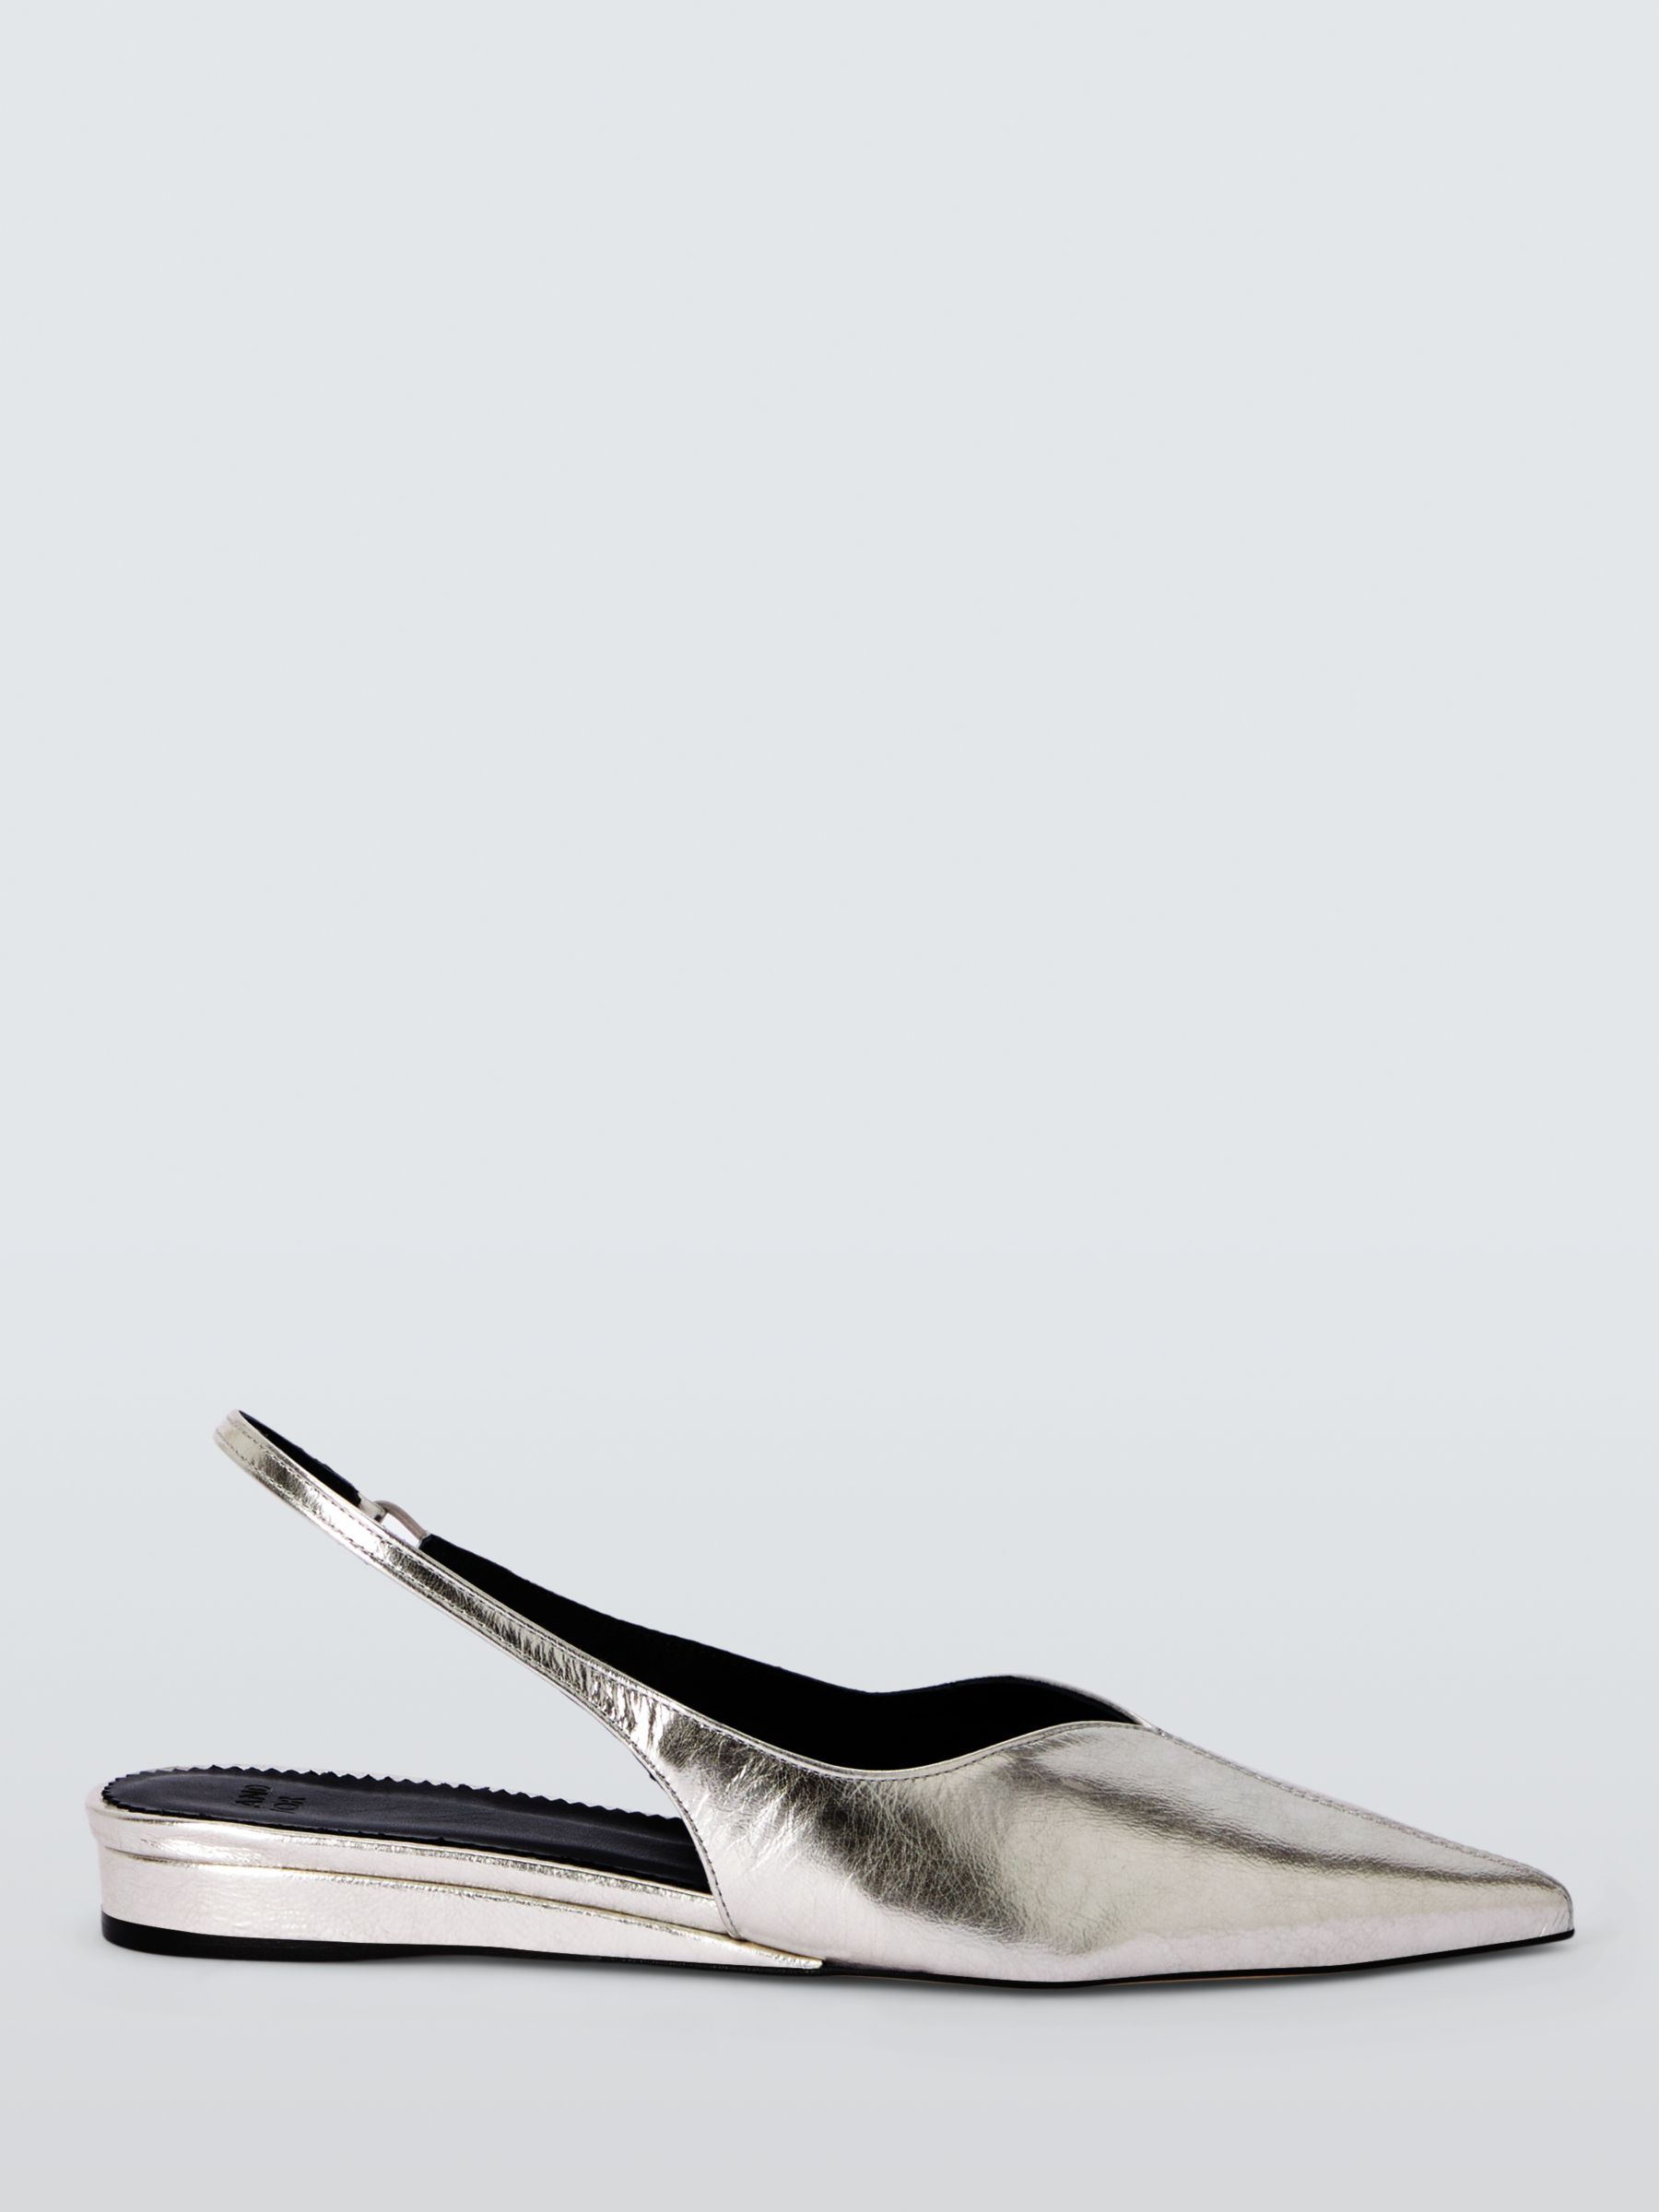 AND/OR Dorset Leather Slingback Open Court Shoes, Silver at John Lewis ...